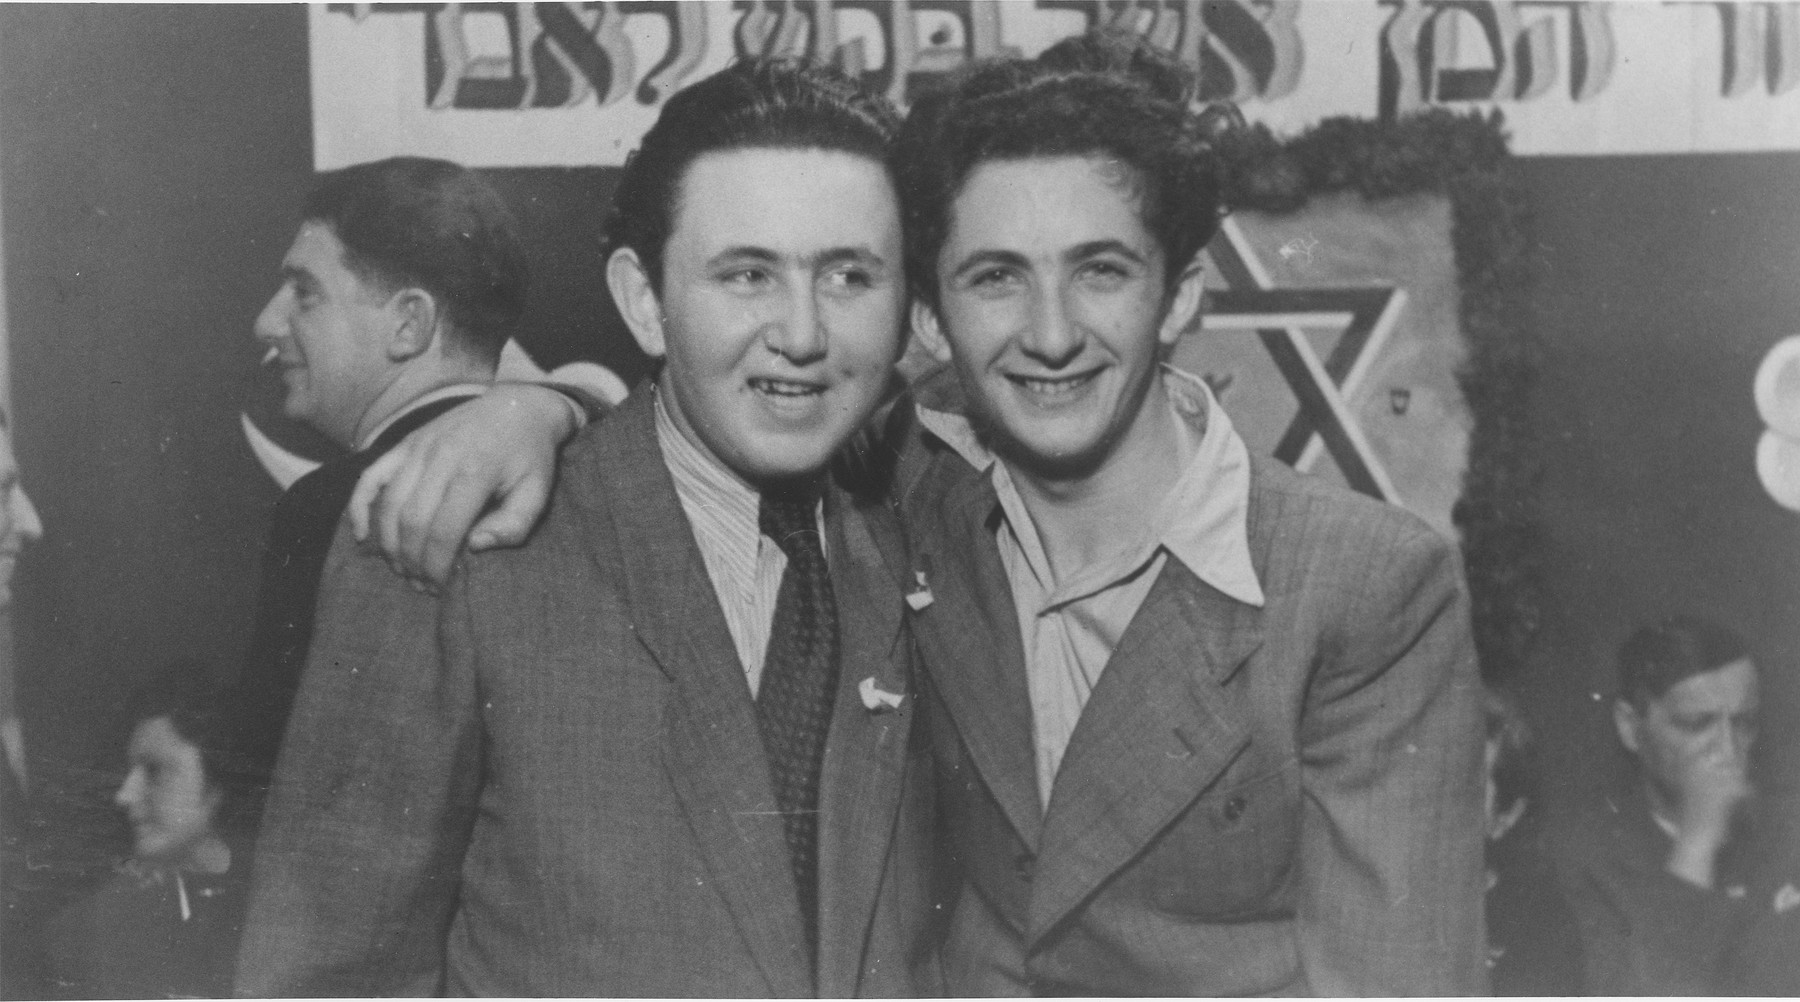 Two young men pose at a Purim party in the Schlachtensee displaced persons camp.

Yeshayahu Zycer (left) and Mischa Gleiberman (right) stand beneath a Hebrew banner that reads, "Cursed be Haman who tried to kill me." (a quotation from the Book of Esther recited on the holiday of Purim).